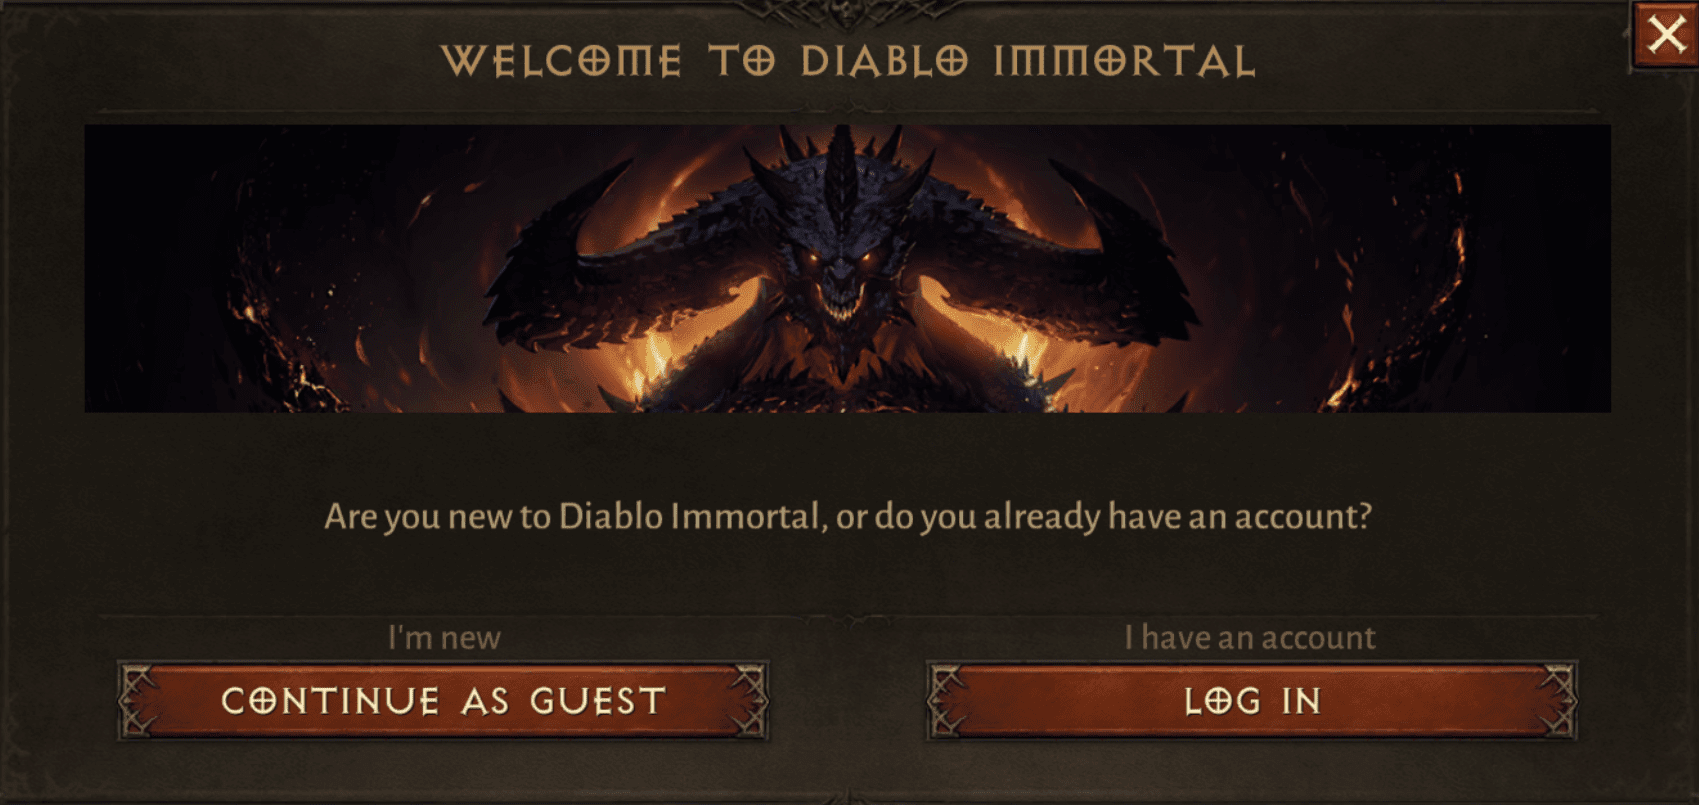 Signing up for Diablo Immortal